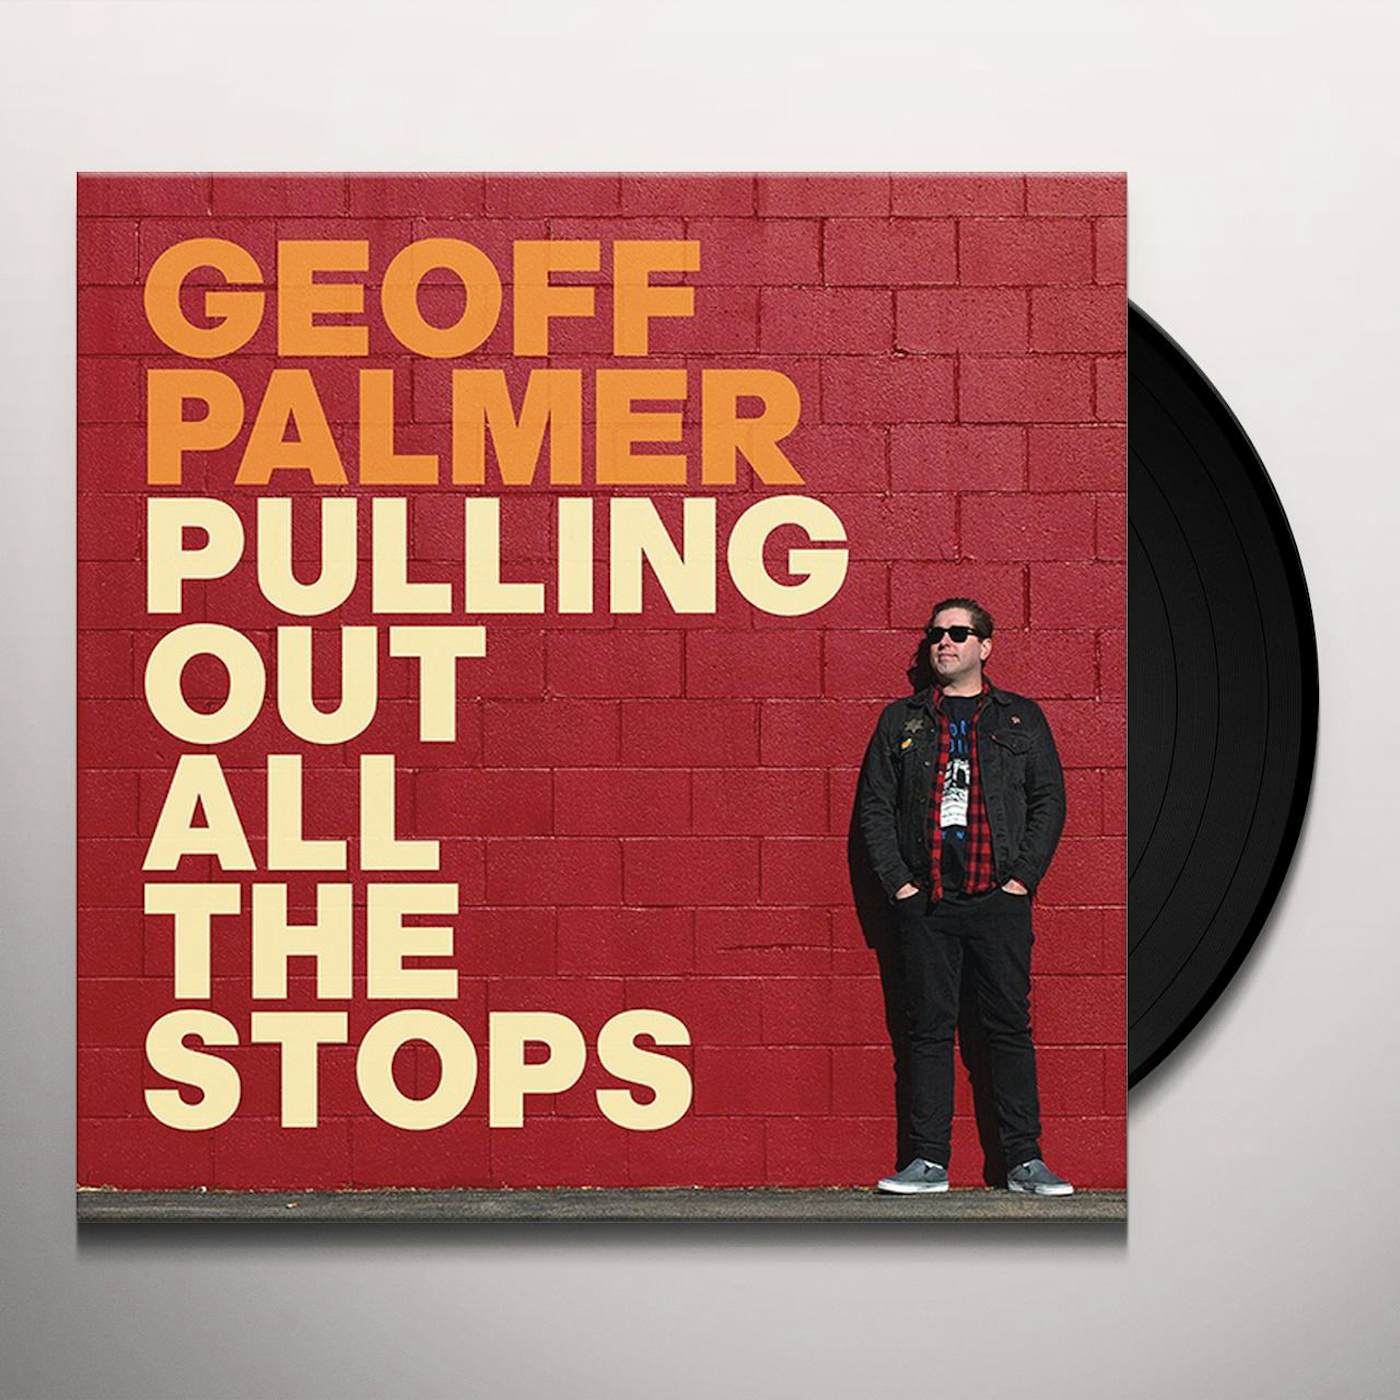 Geoff Palmer Pulling Out All The Stops Vinyl Record